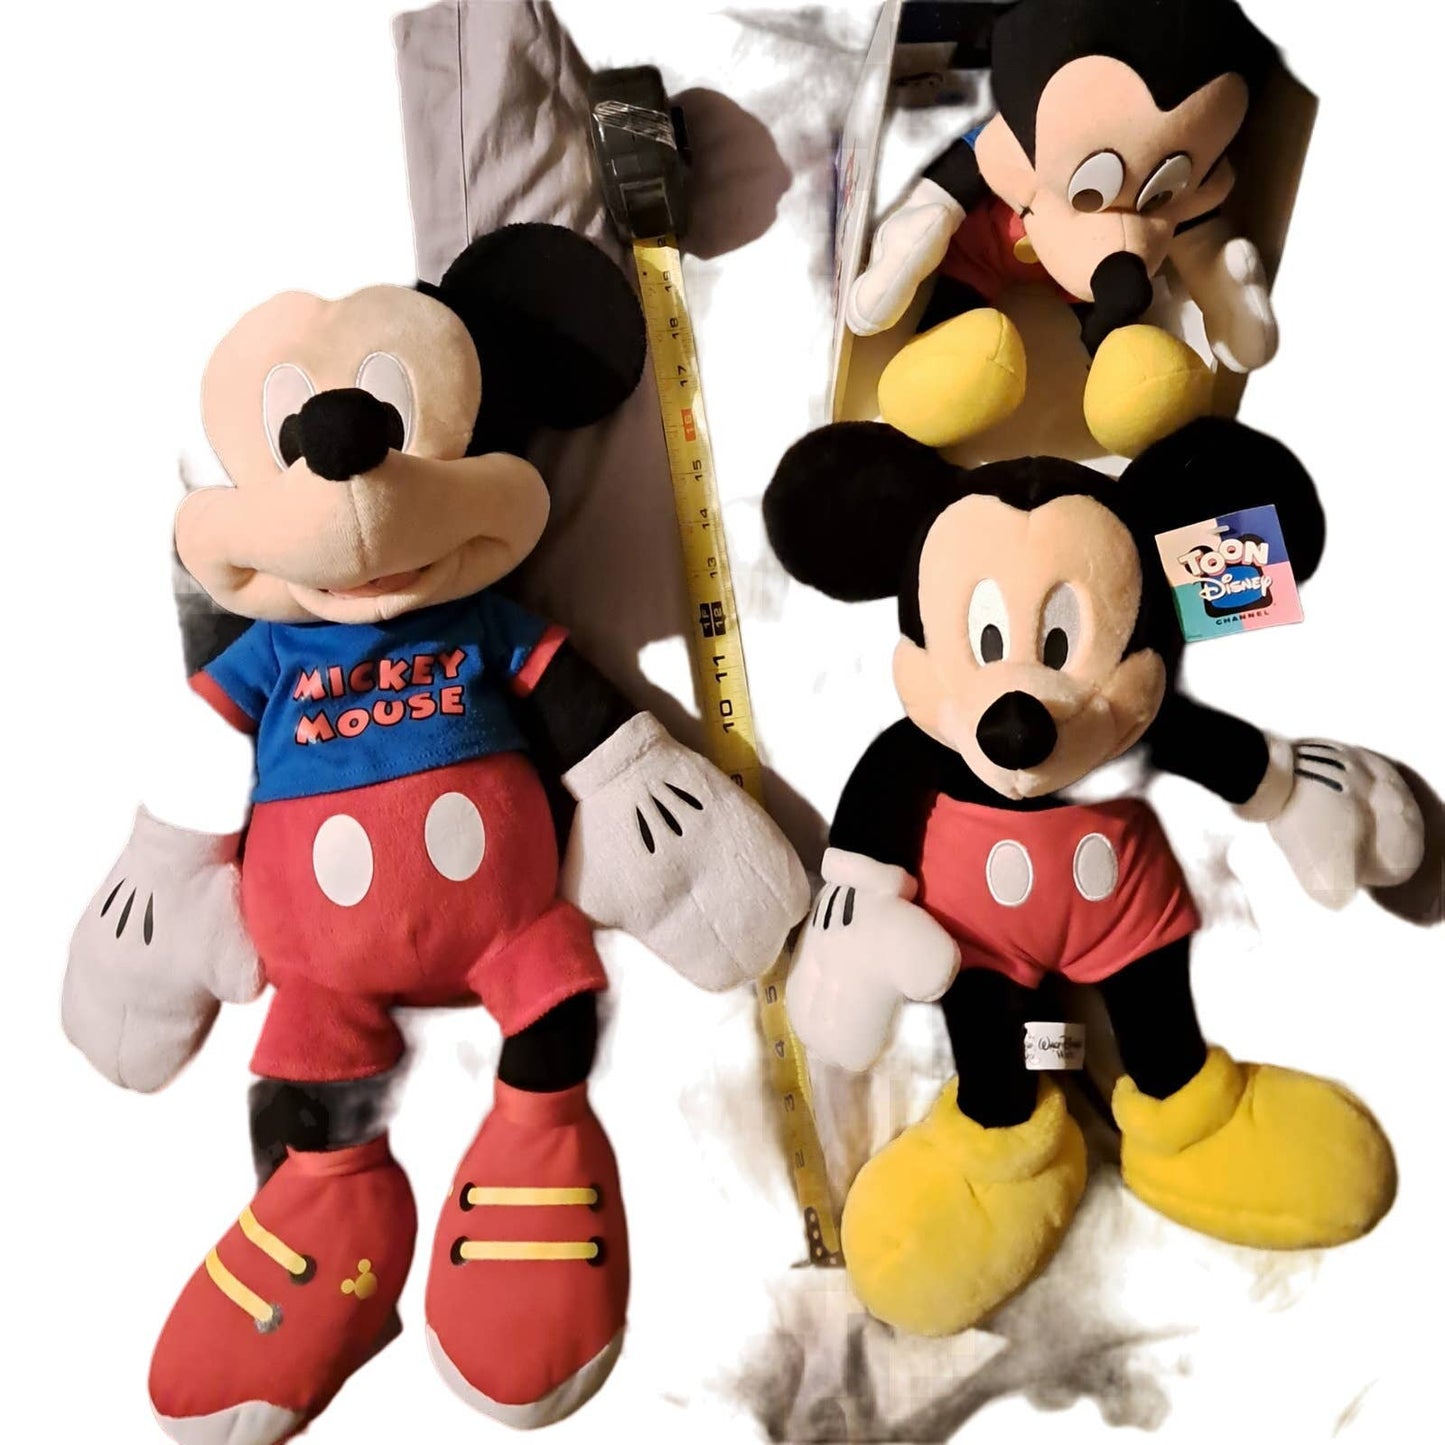 SALE! 3 NEW - Mickey Mouse 19 inch -16 inch -14 inch FABULOUS MICKEY